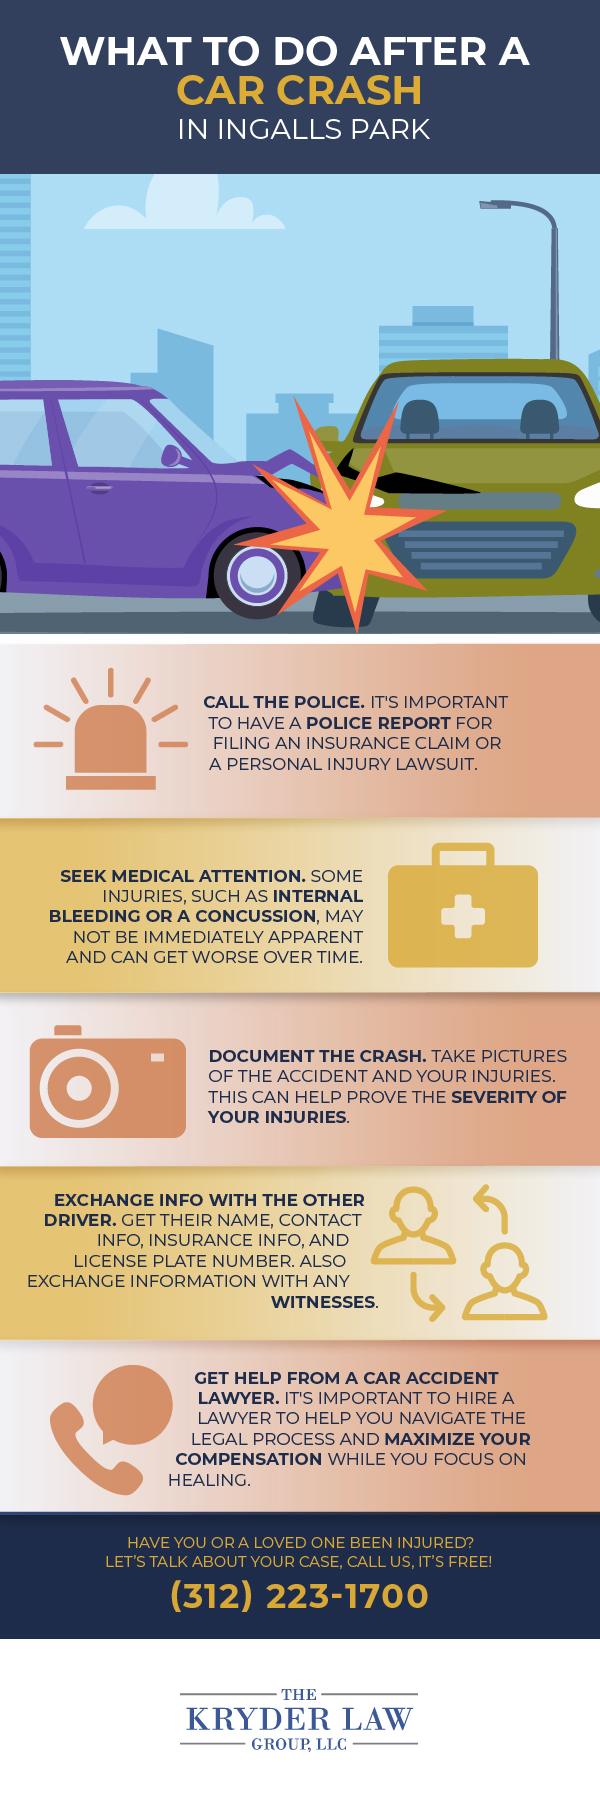 What to Do After a Car Crash in Ingalls Park Infographic